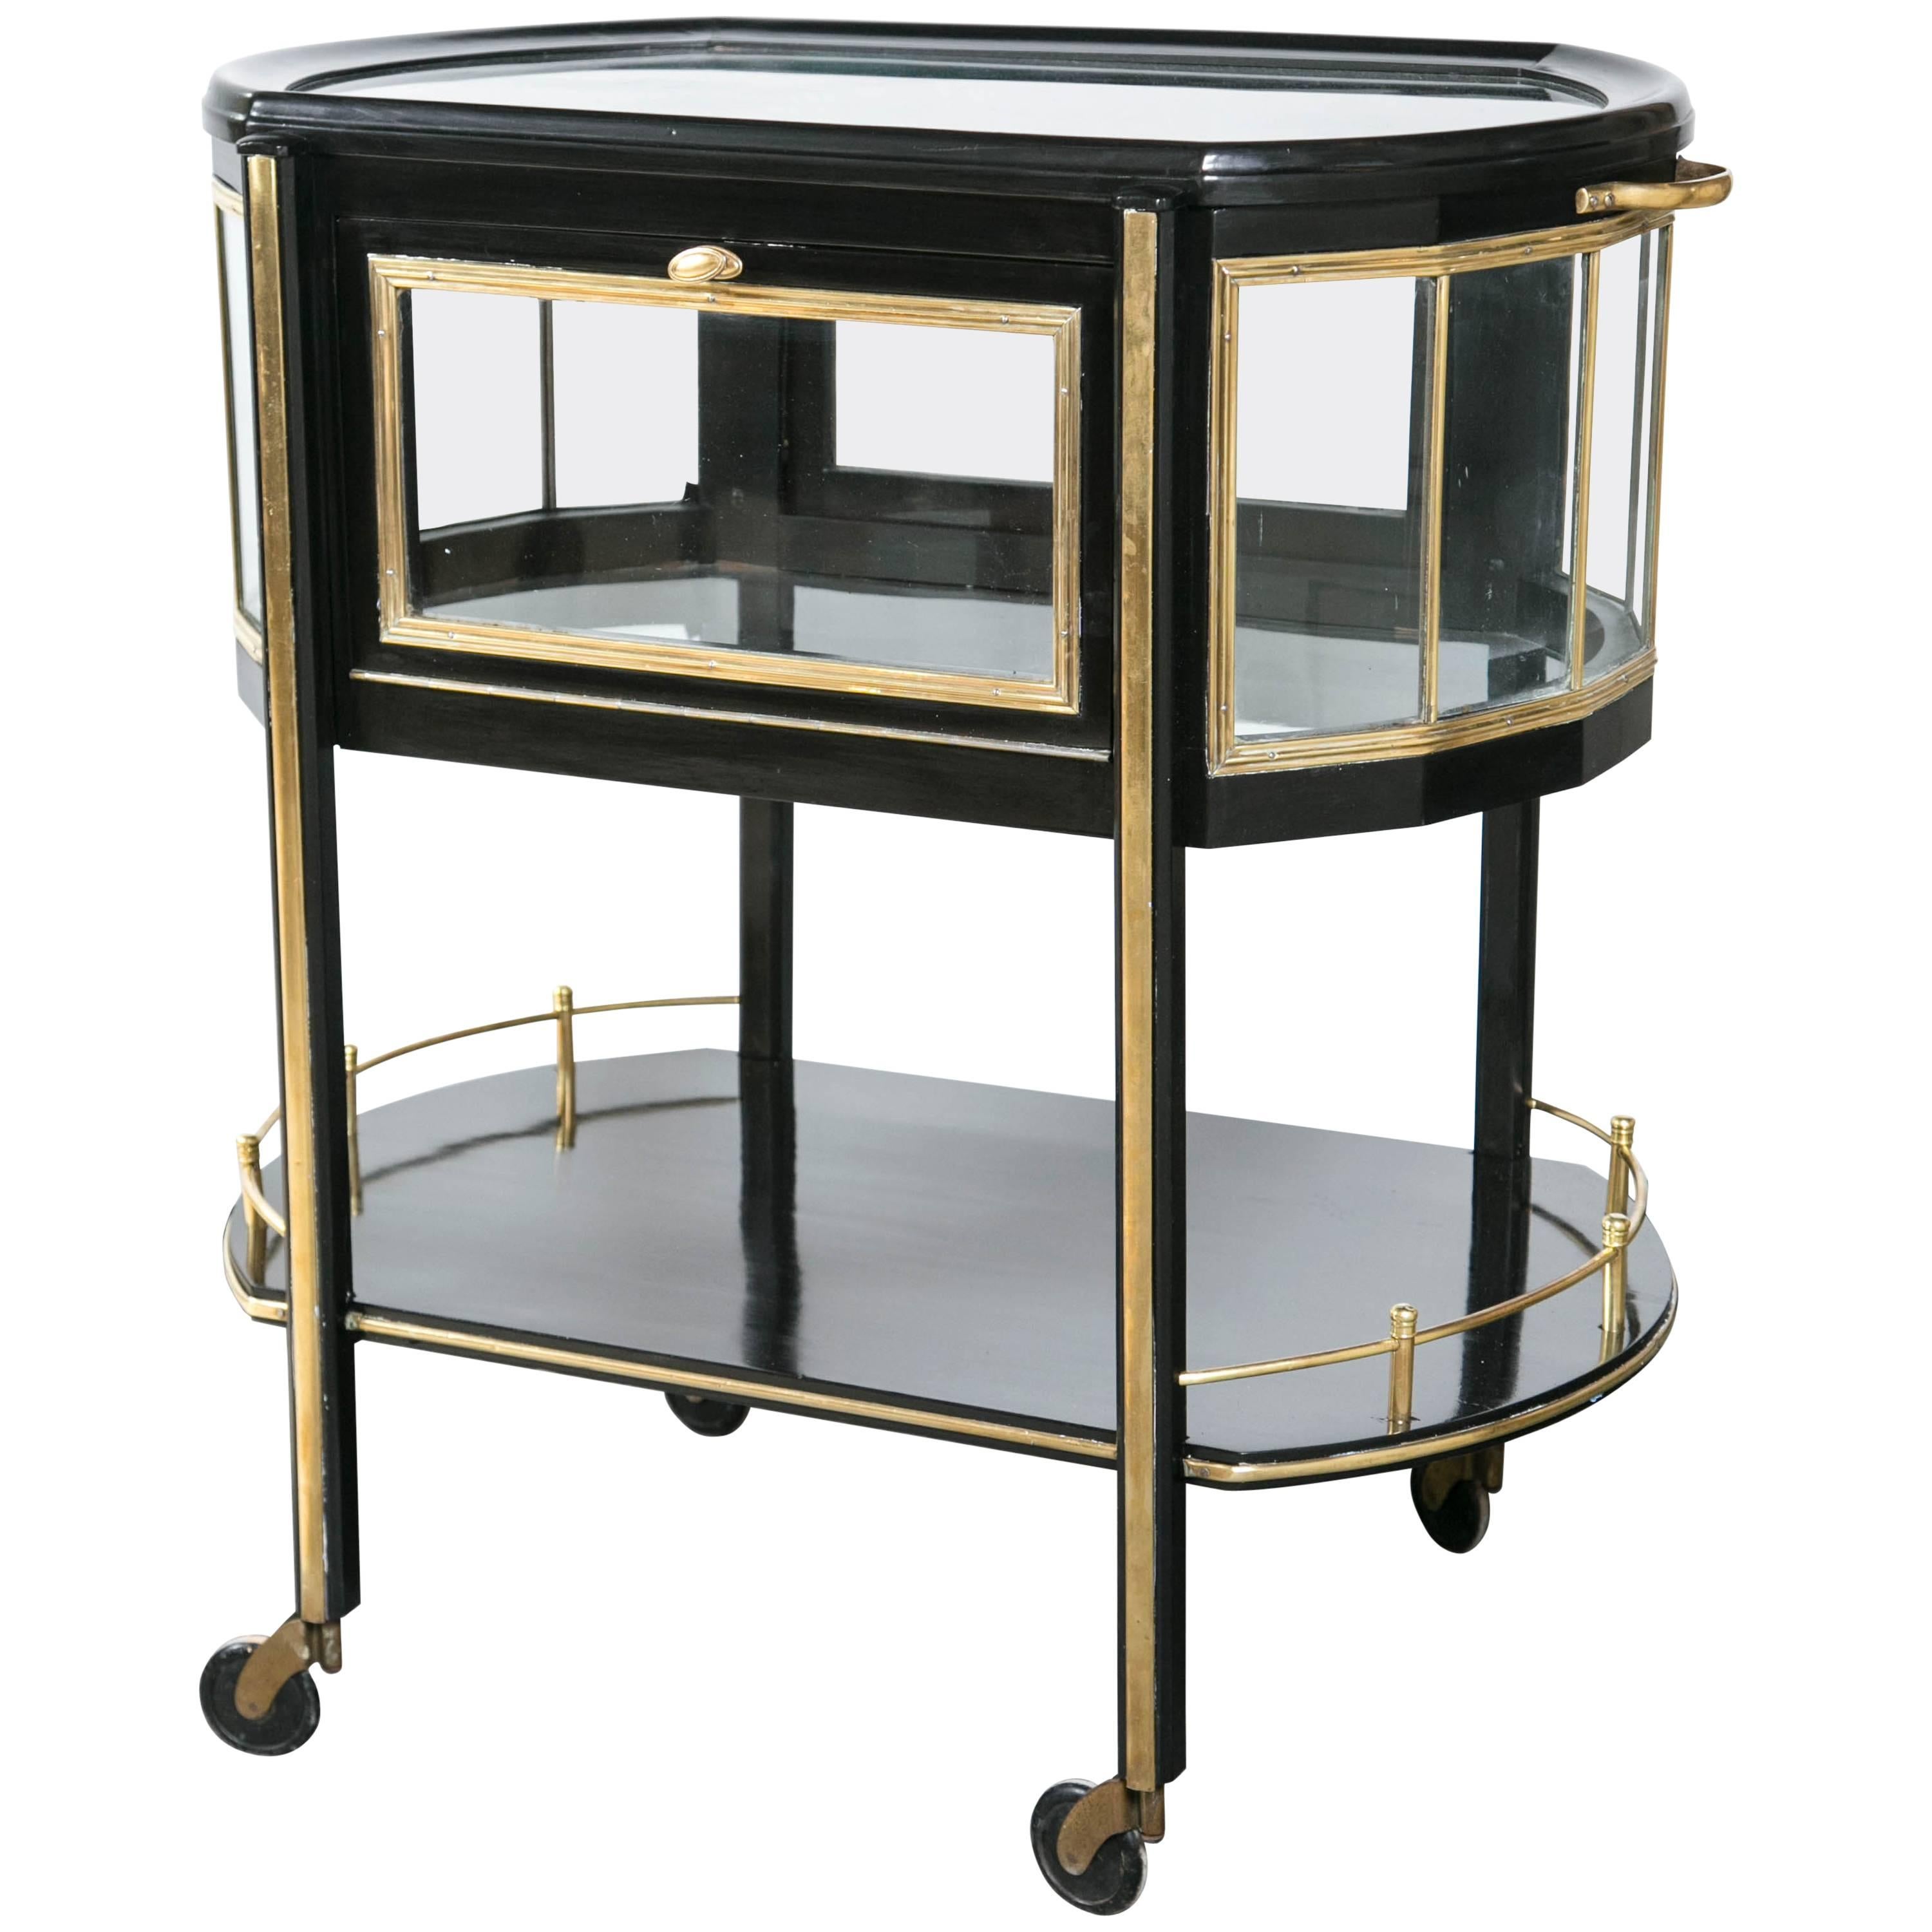 German Lacquered Mid-Century Modern Brass and Mahogany Ebonized Trolley